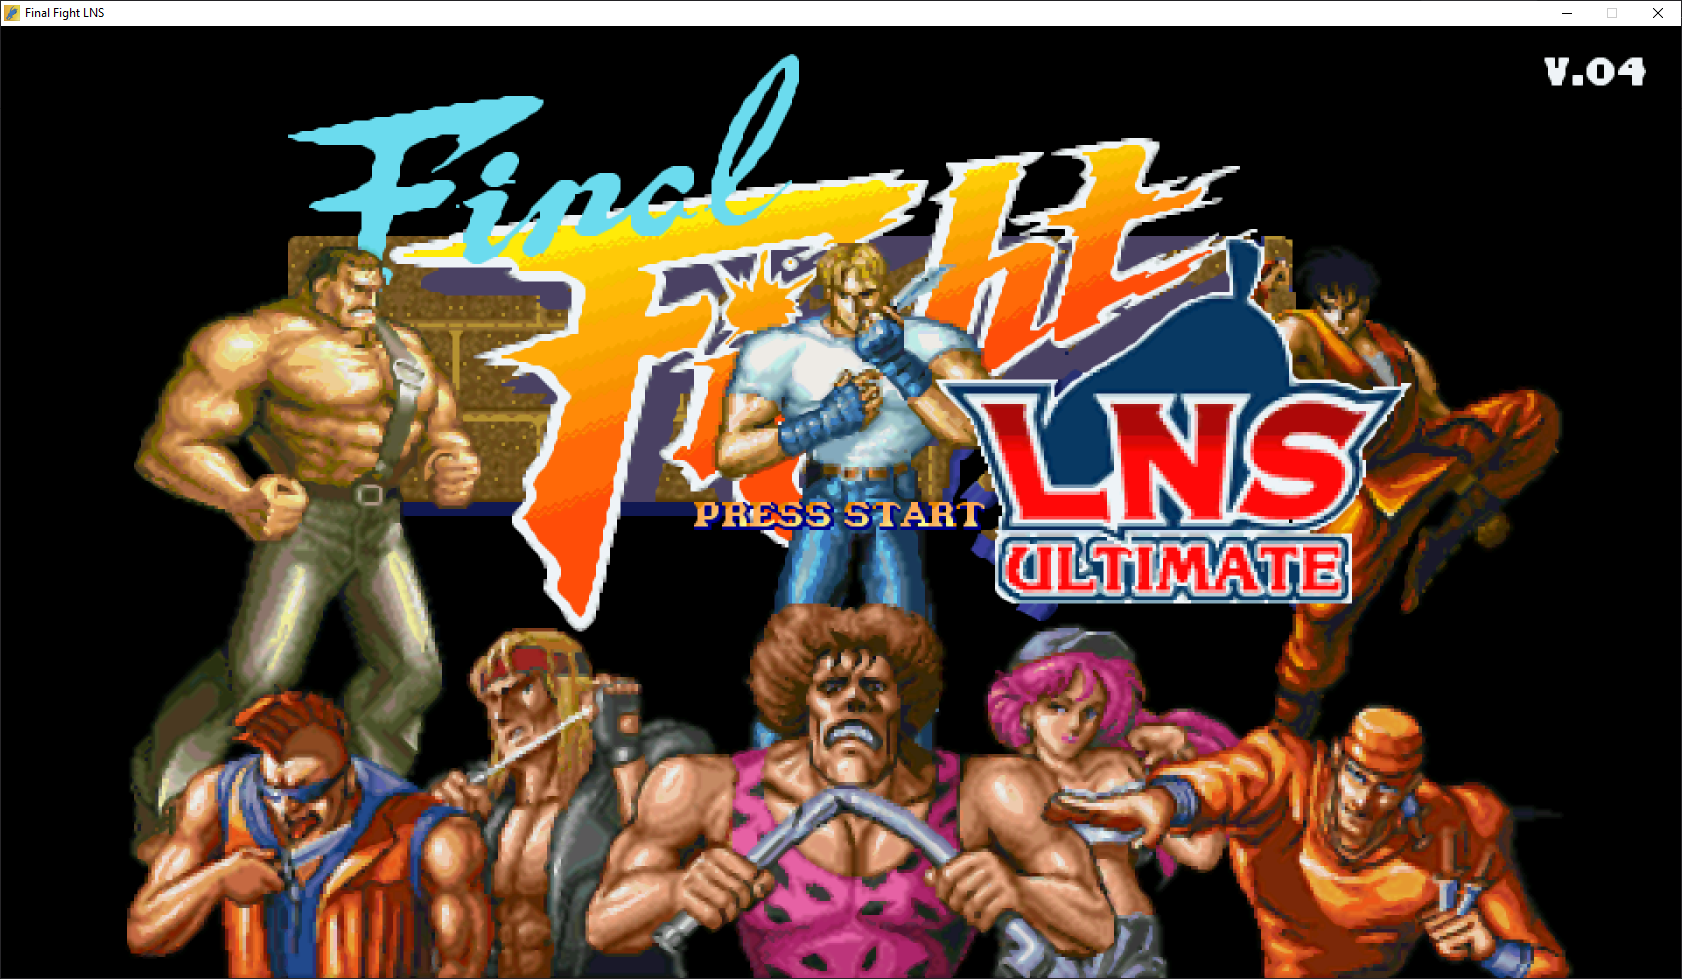 FINAL FIGHT LNS ULTIMATE V.04-openbor-ready to play